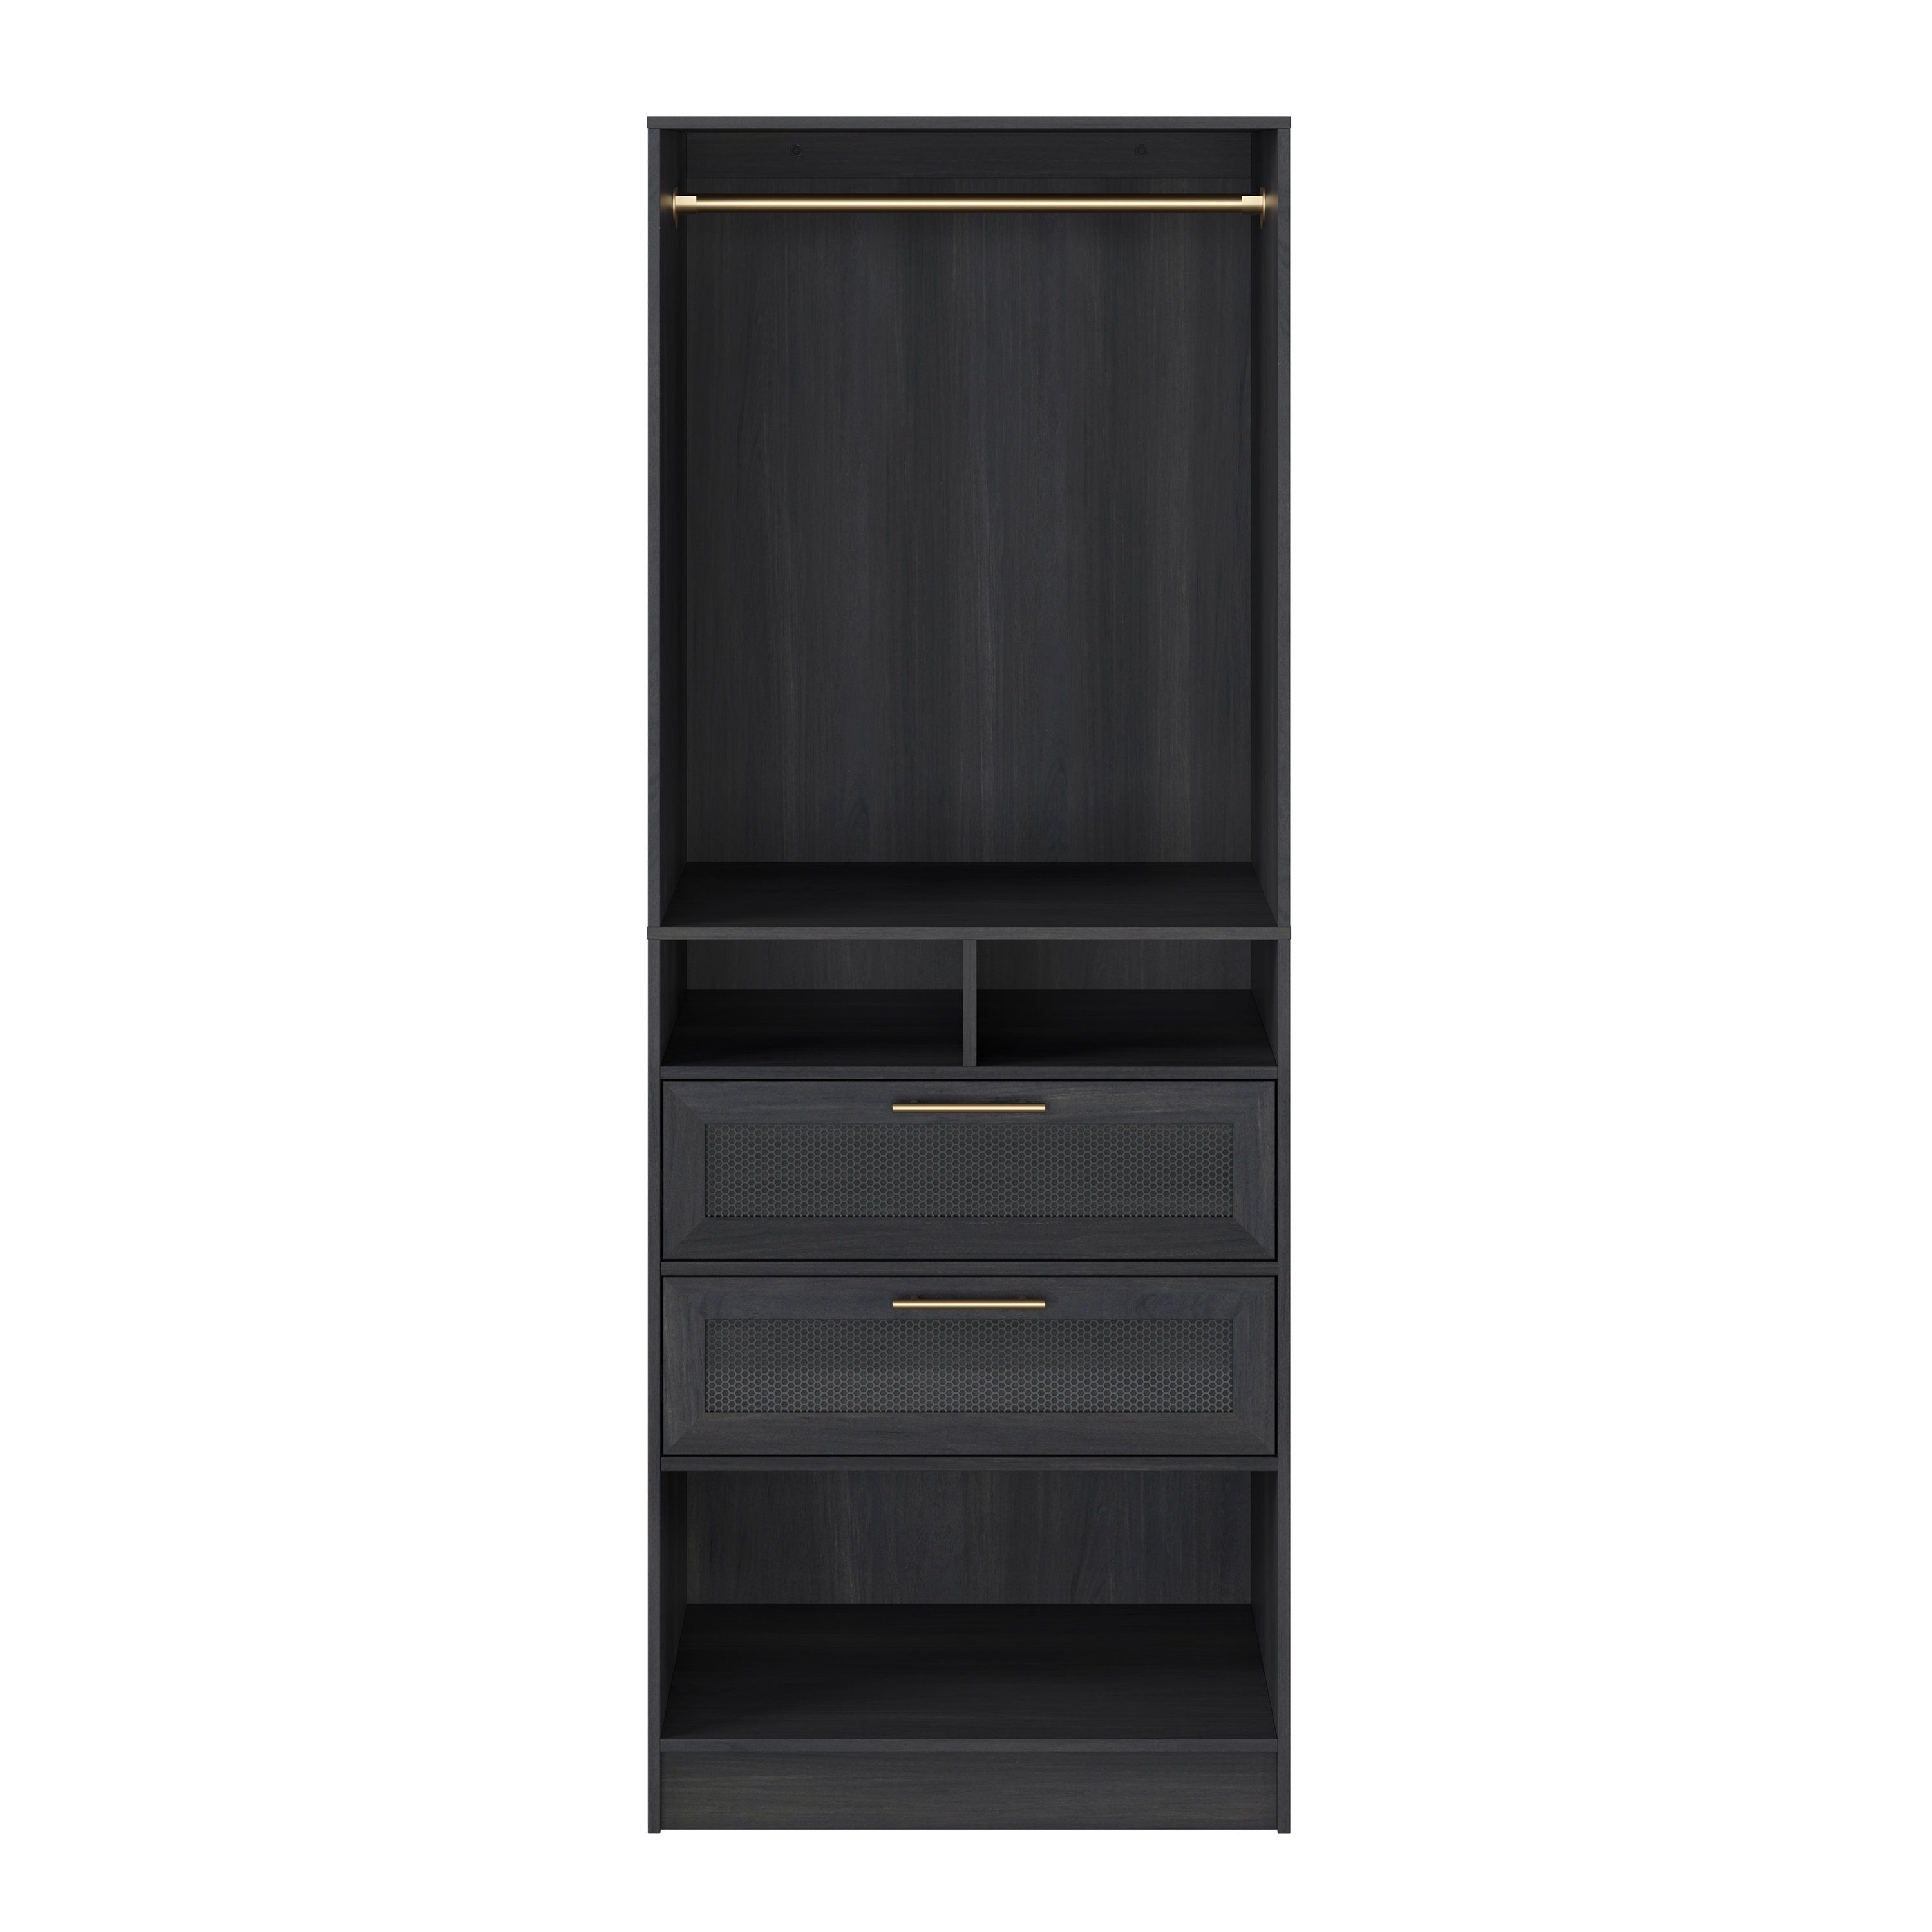 Scott Living Robin 30" Wardrobe Closet With 2 Drawers And 4 Shelves With  Clothes Rod Closet System & Reviews | Wayfair Within 4 Shelf Closet Wardrobes (View 14 of 15)